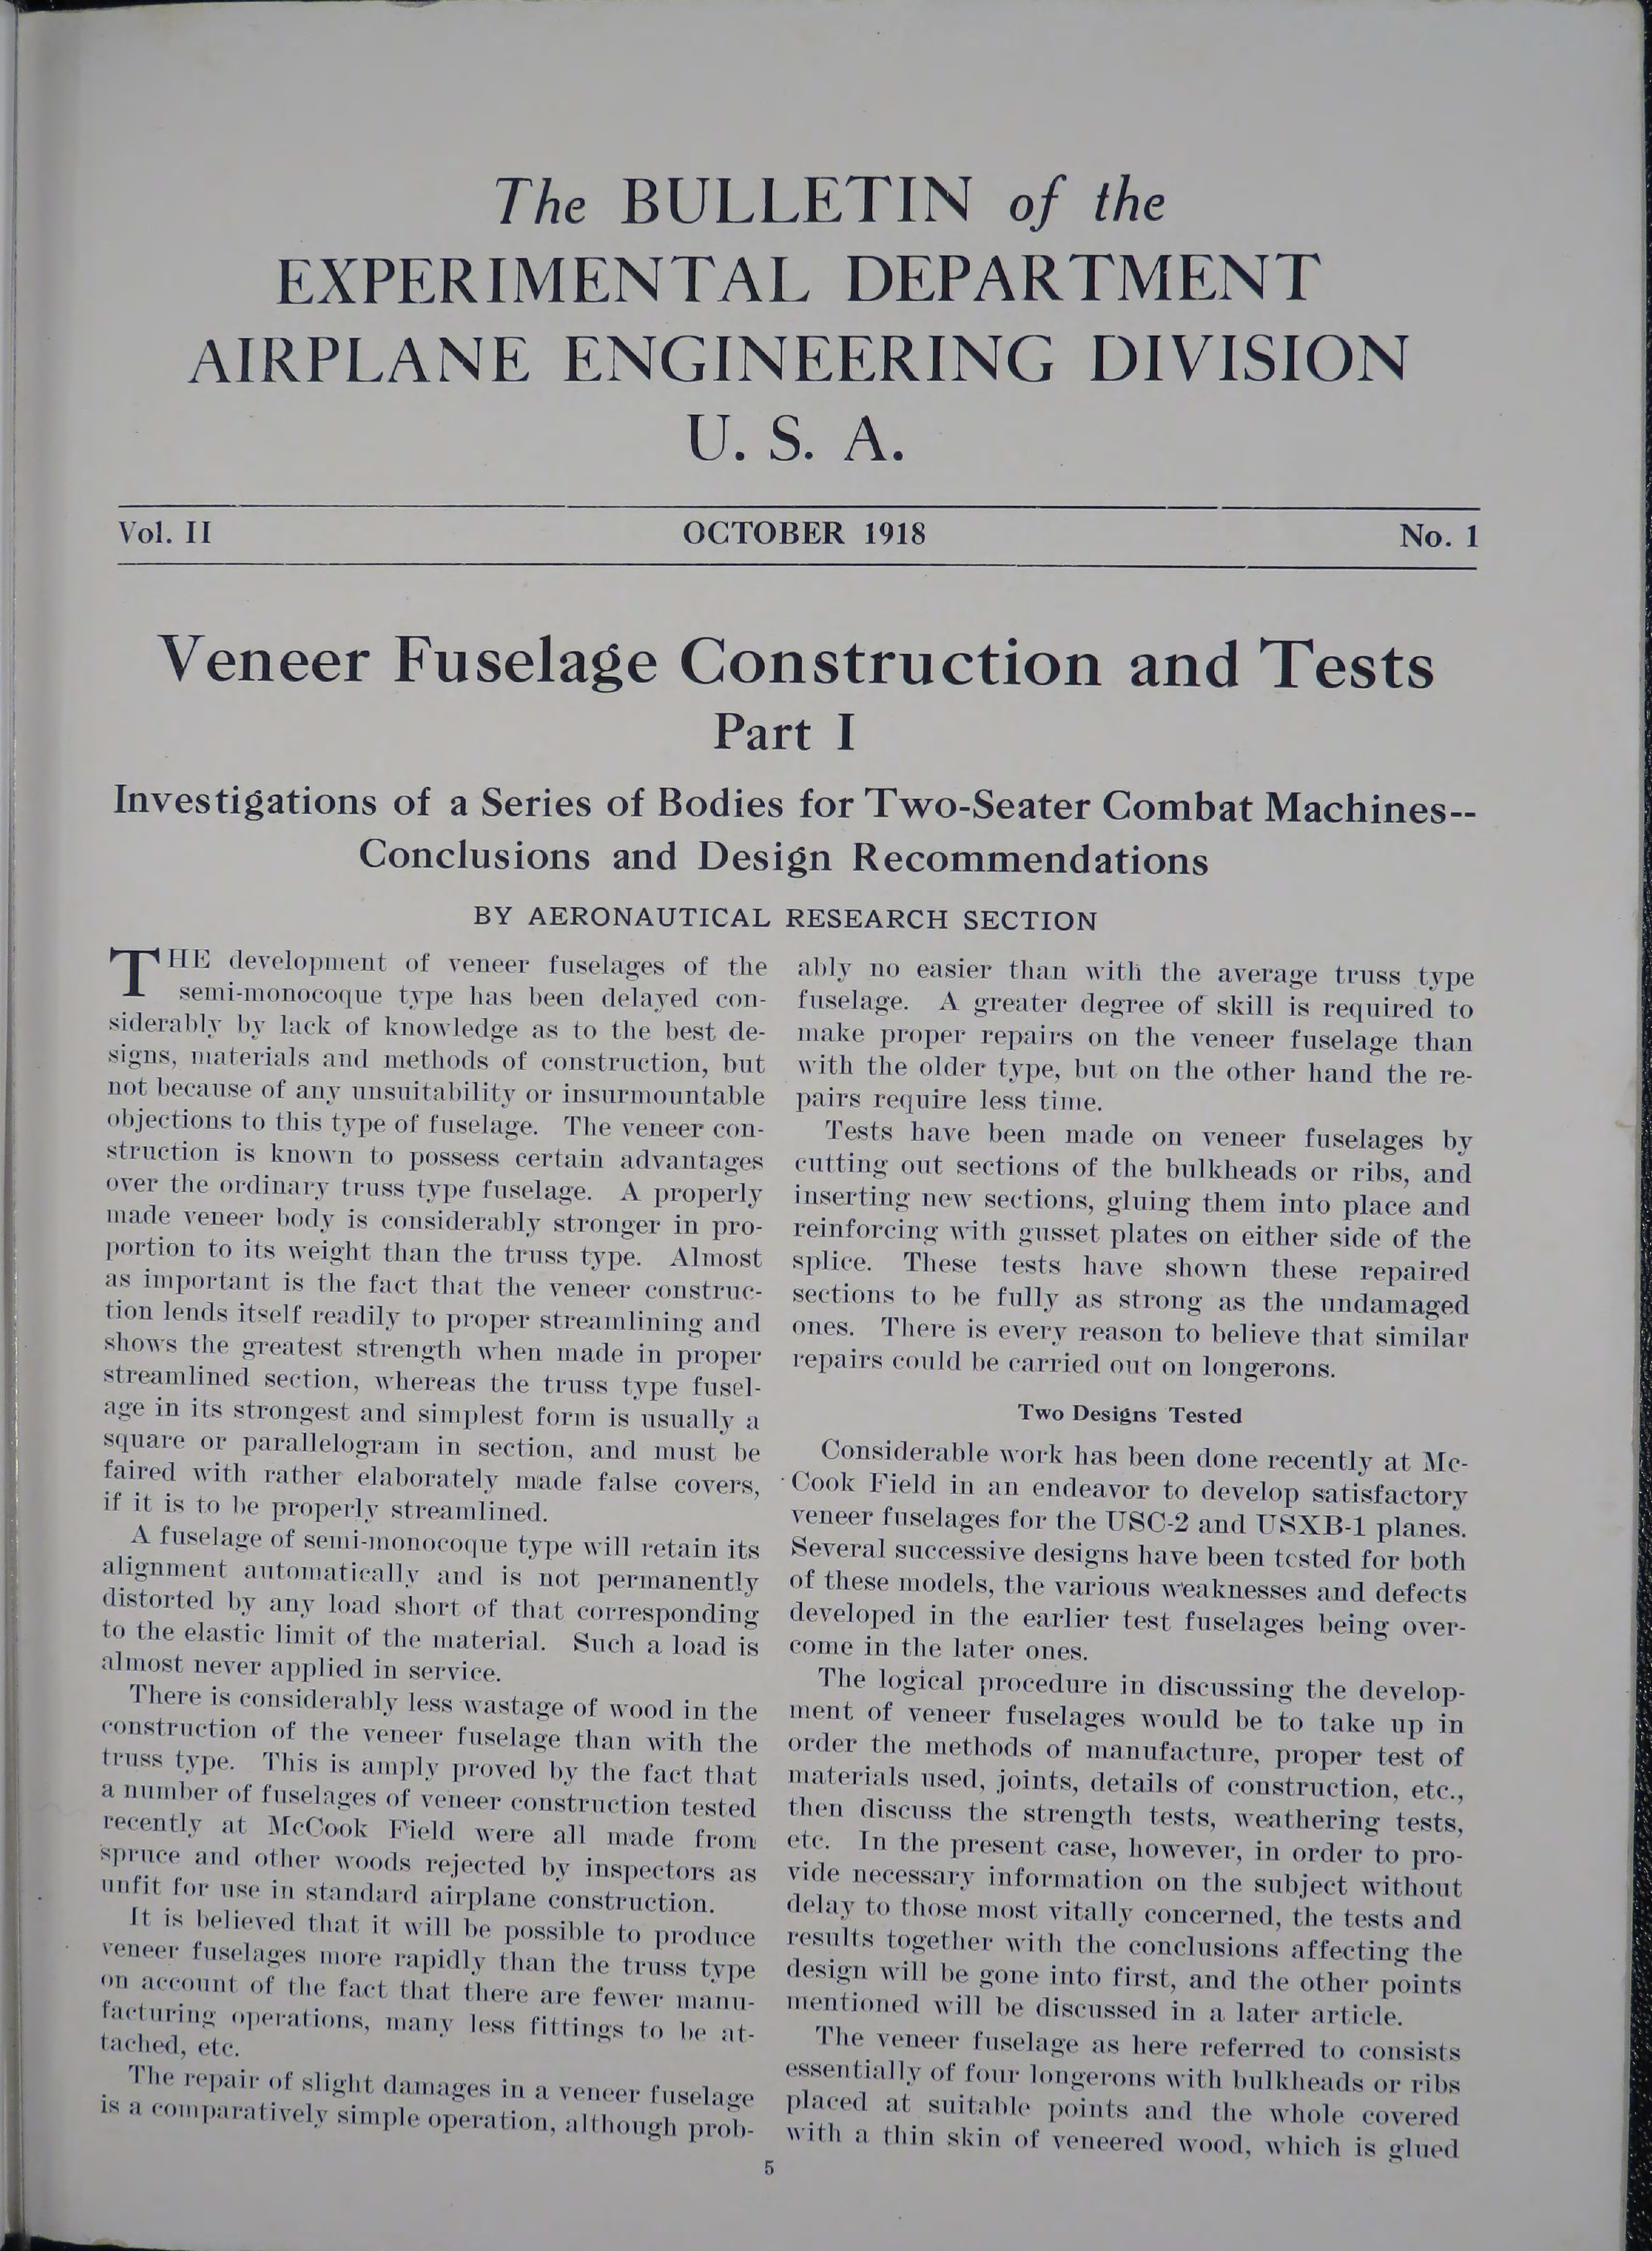 Sample page 5 from AirCorps Library document: Bulletin on the Experimental Department of Airplane Engineering Division